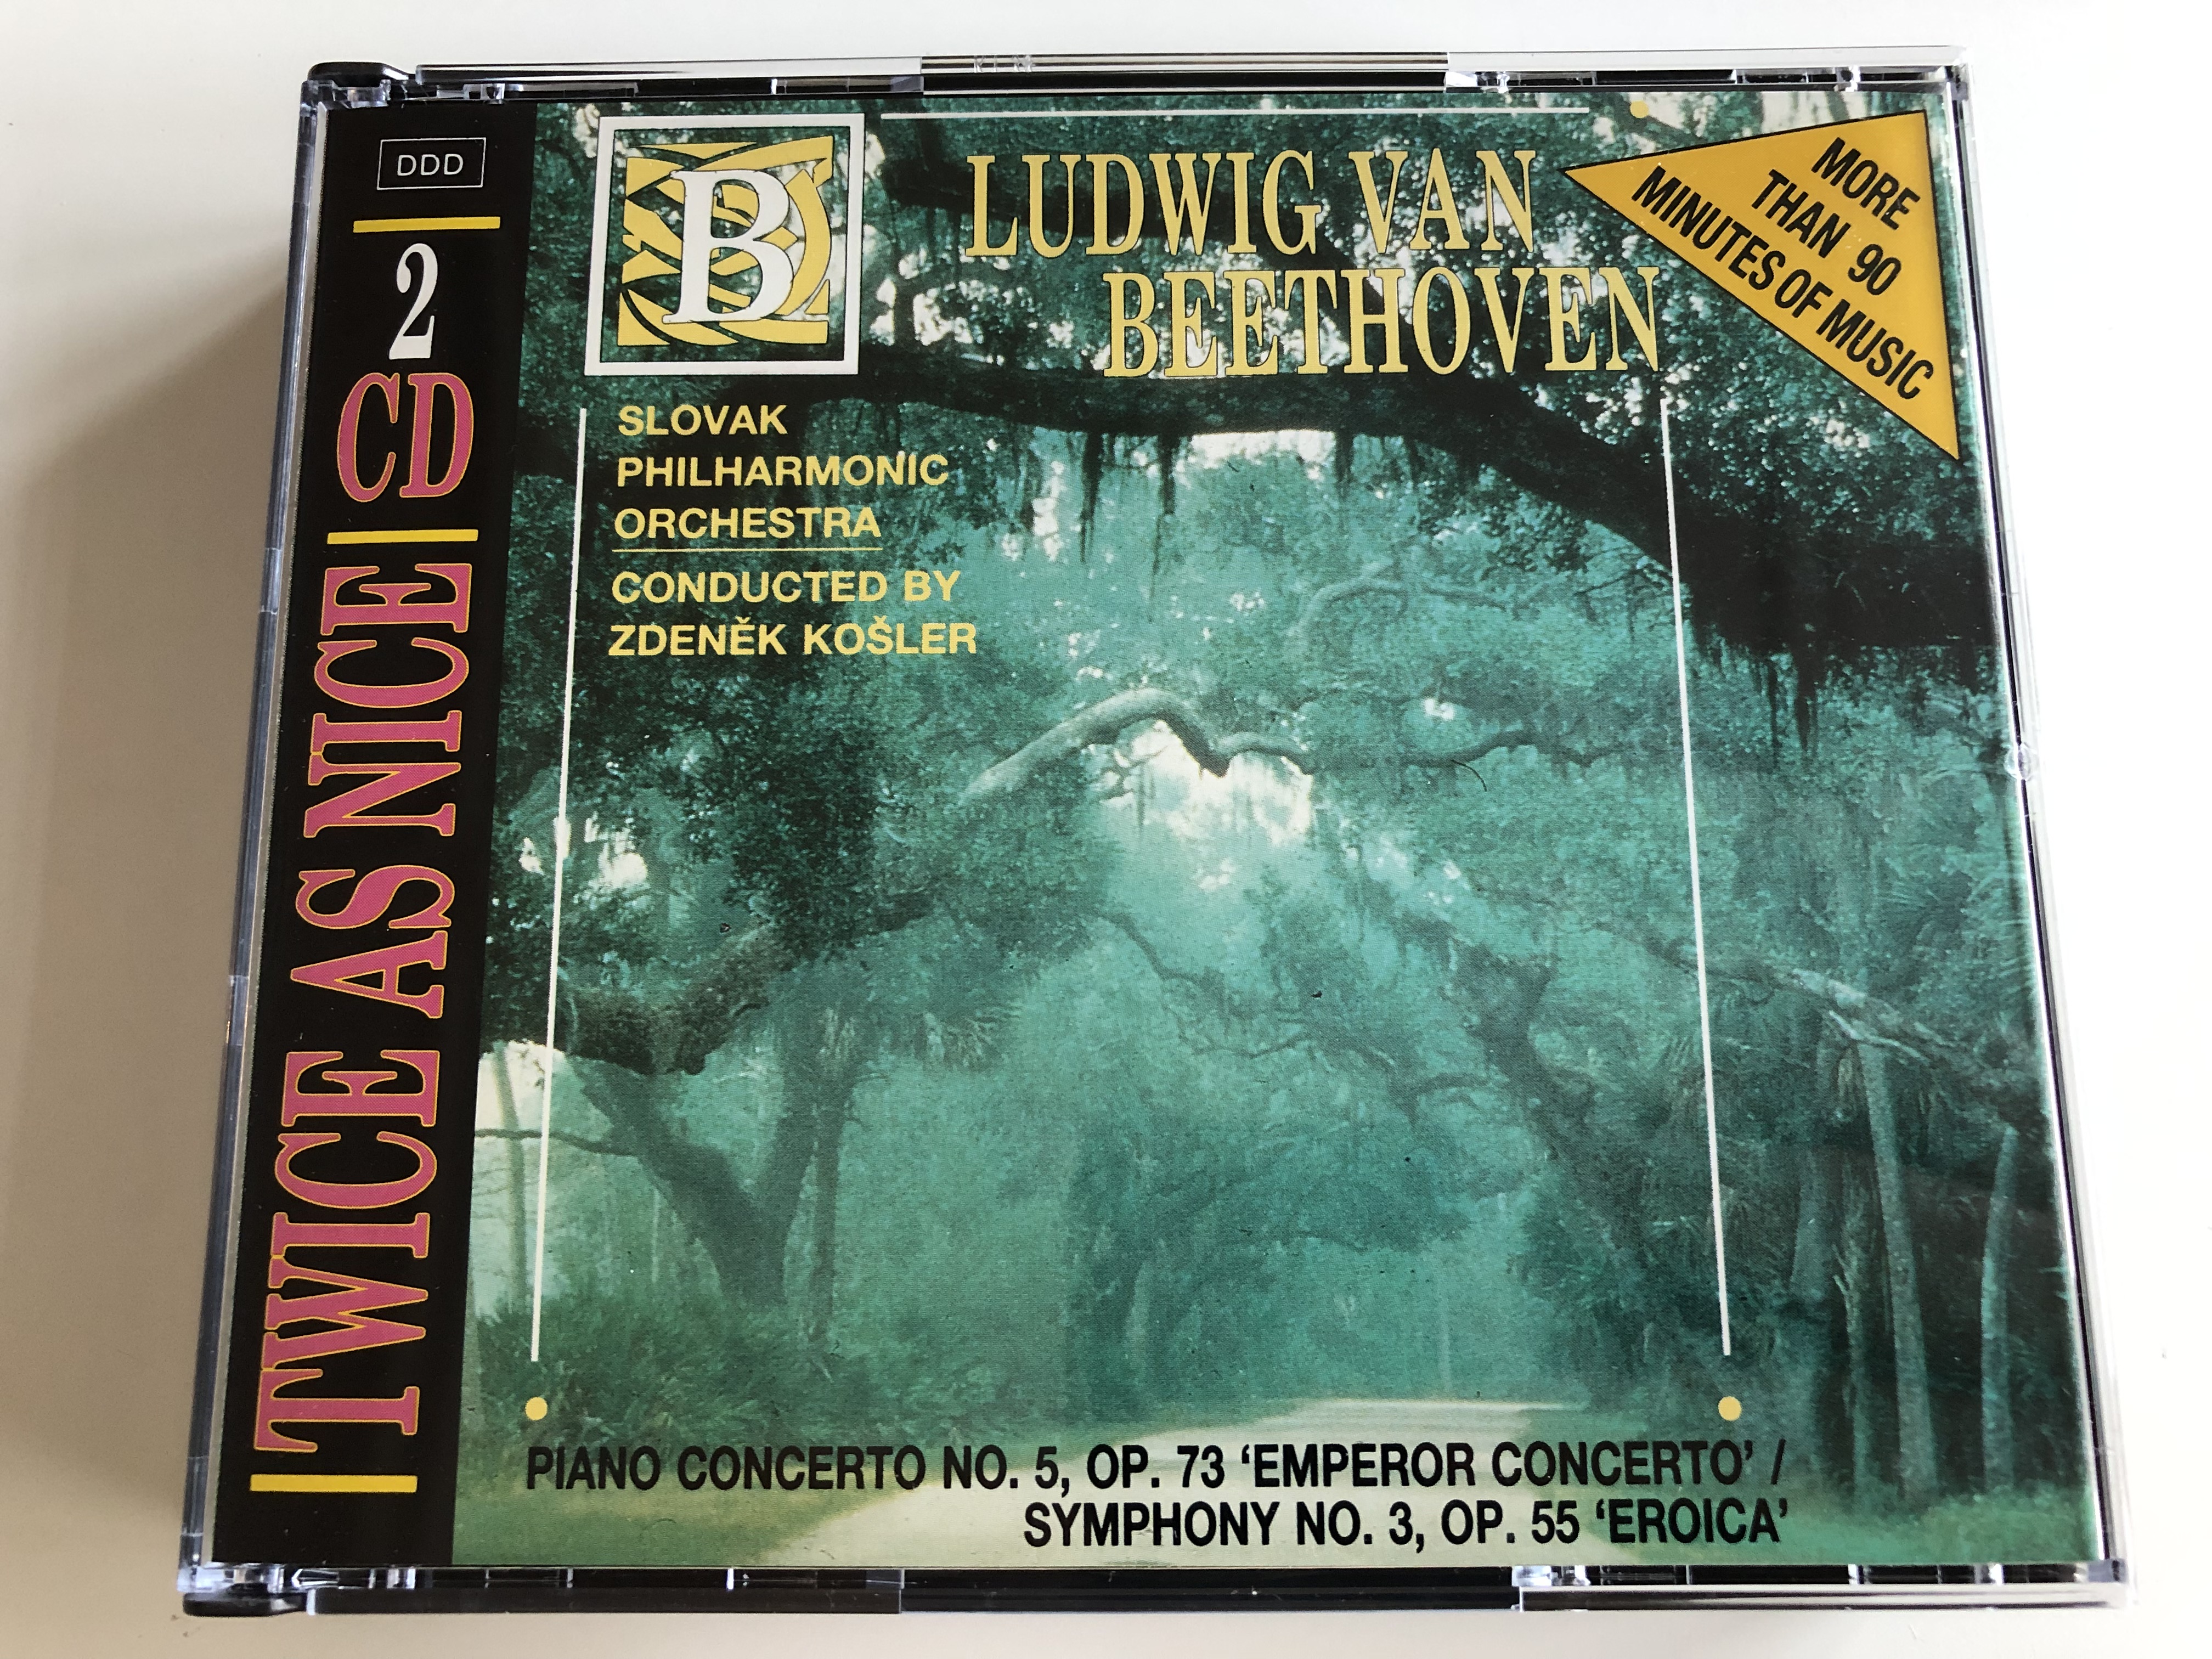 ludwig-van-beethoven-piano-concerto-no.-5-op.-73-emperor-concerto-symphony-no.-3-op.-55-eroica-slovak-philharmonic-orchestra-conducted-by-zdenek-ko-ler-2-cd-more-than-90-minutes-of-music-1-.jpg